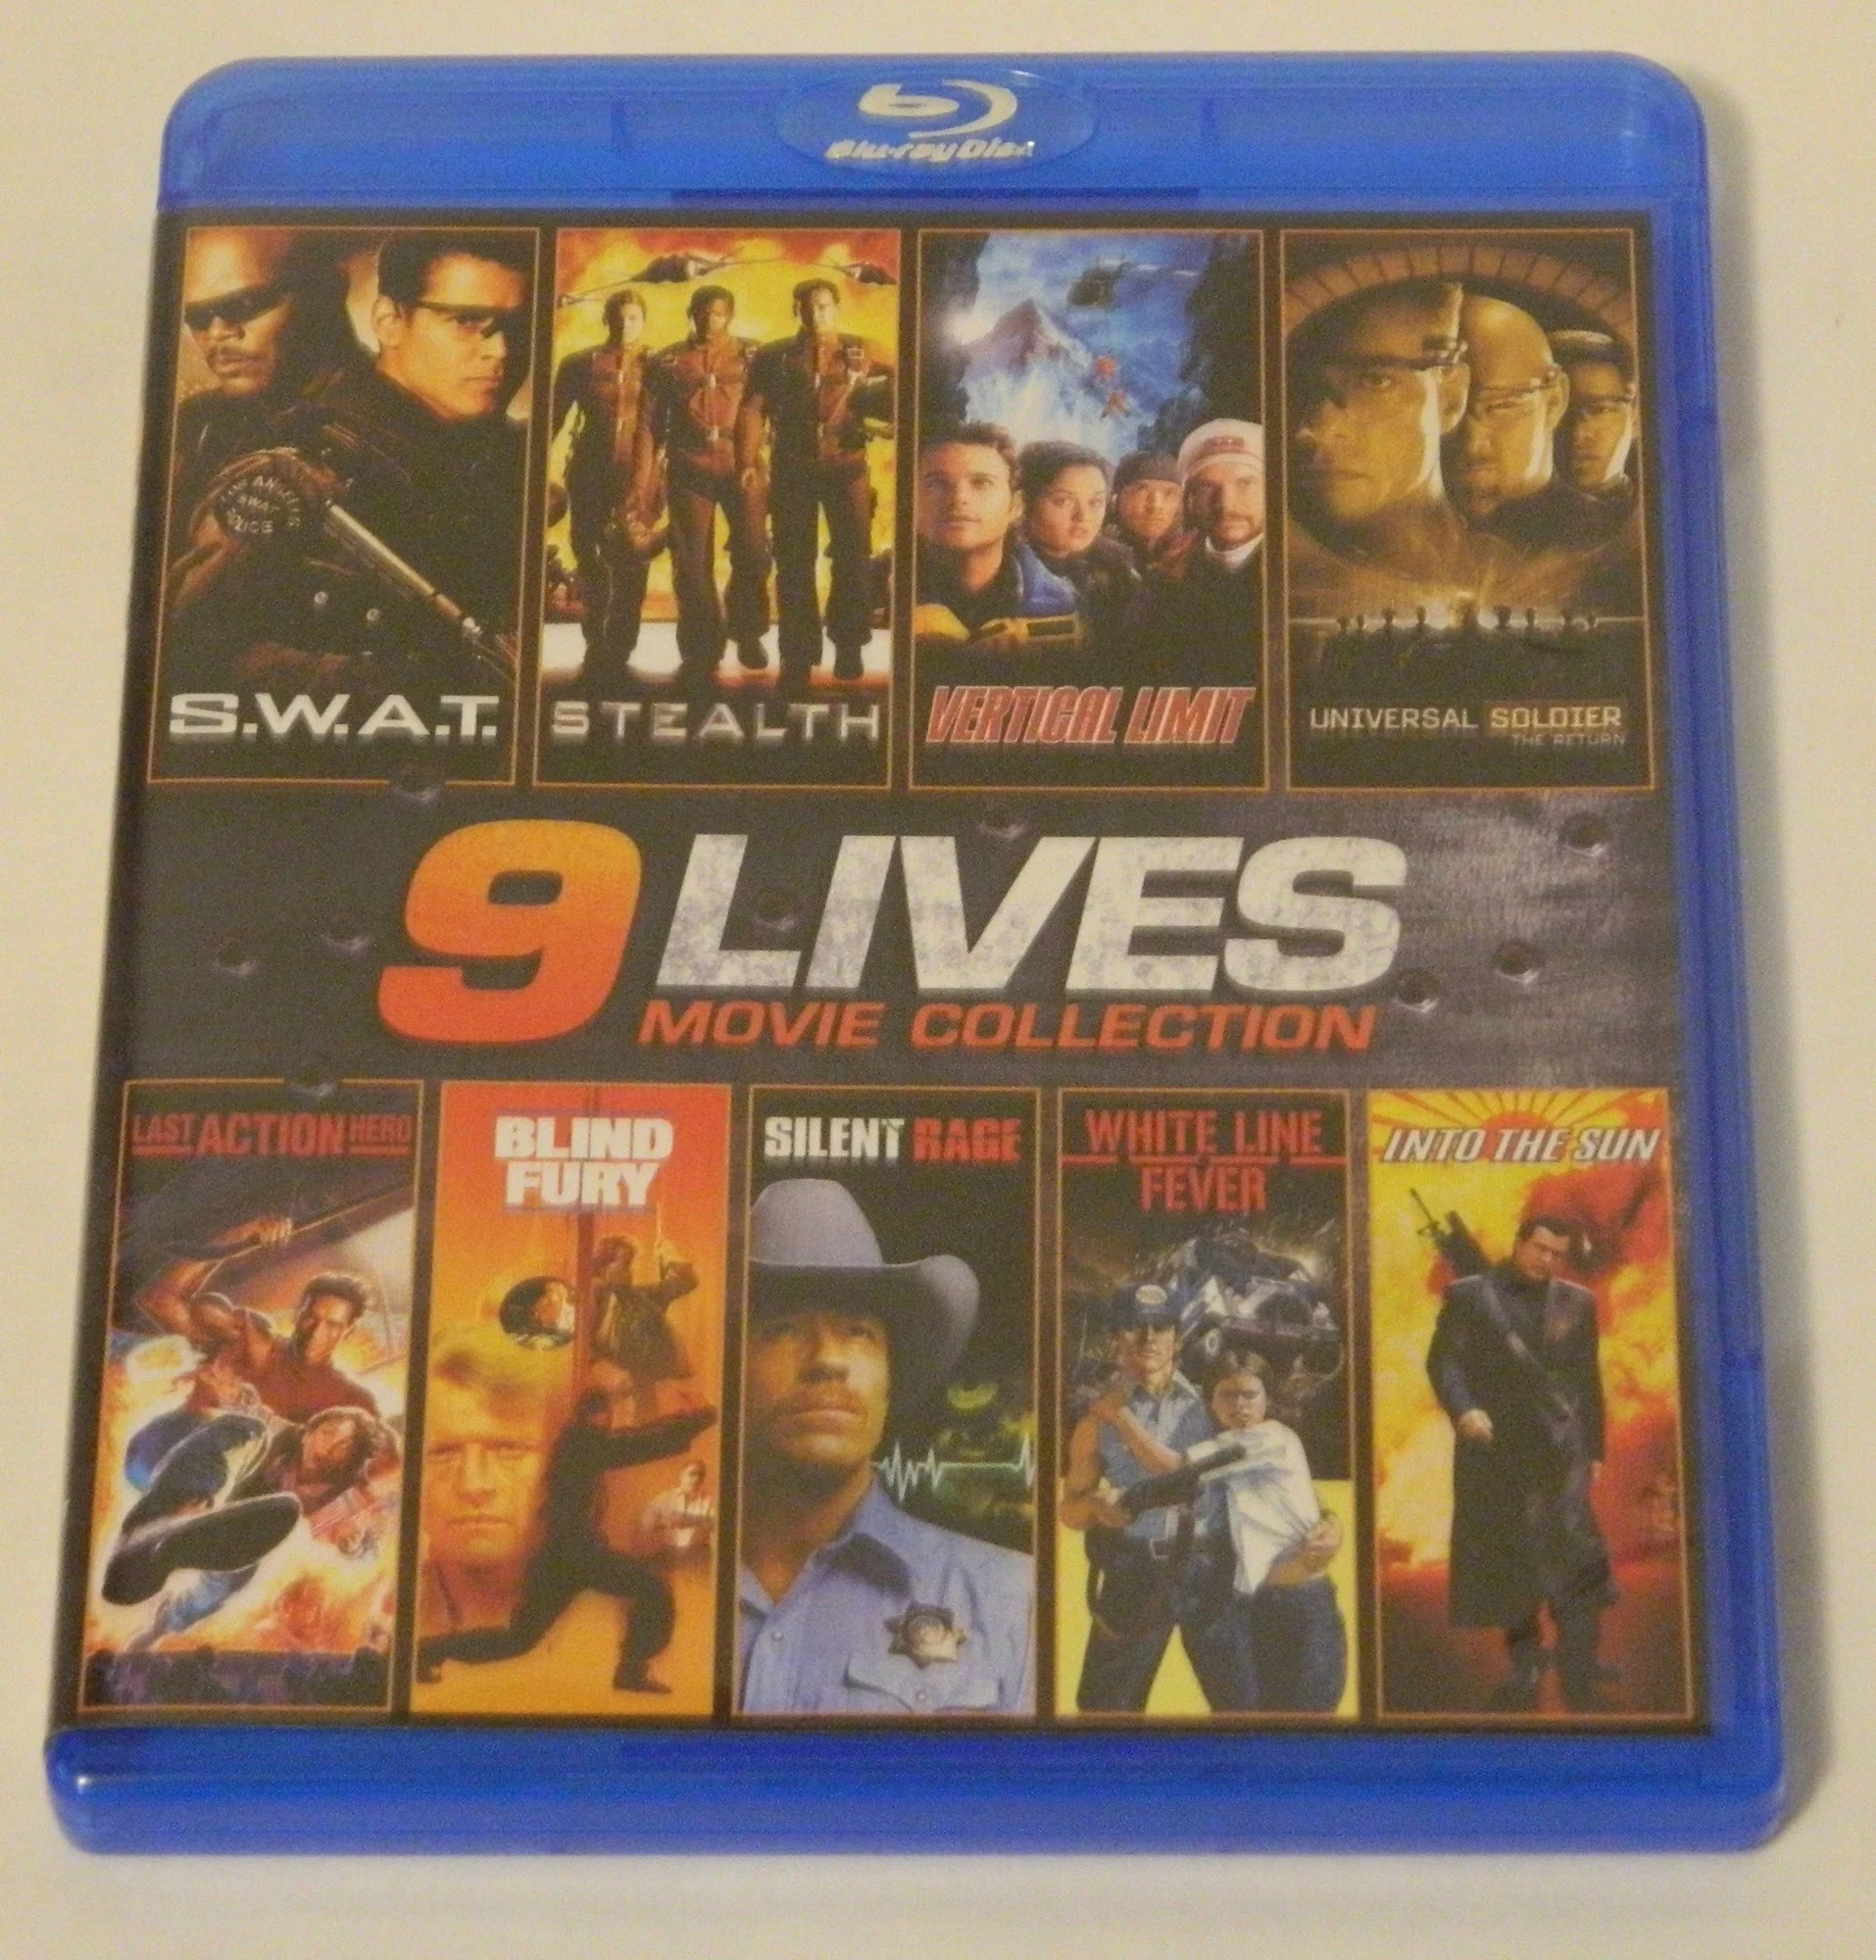 9 Lives Movie Collection Blu-ray